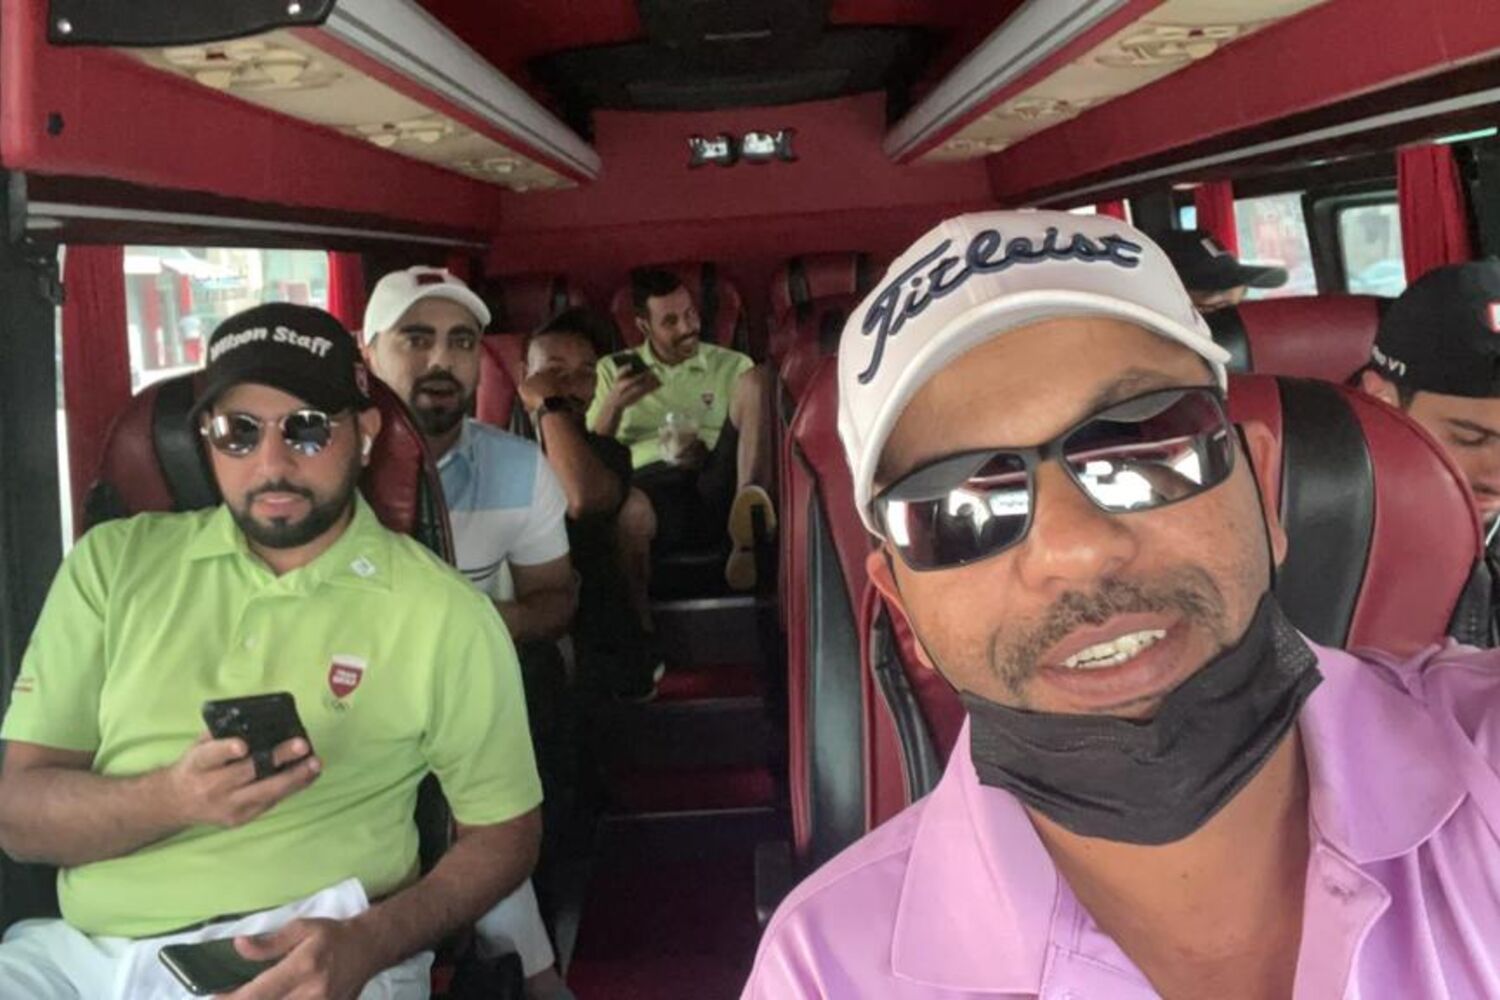 2021 Ryder Cup Format Golf Match is underway between Qatar and Morocco